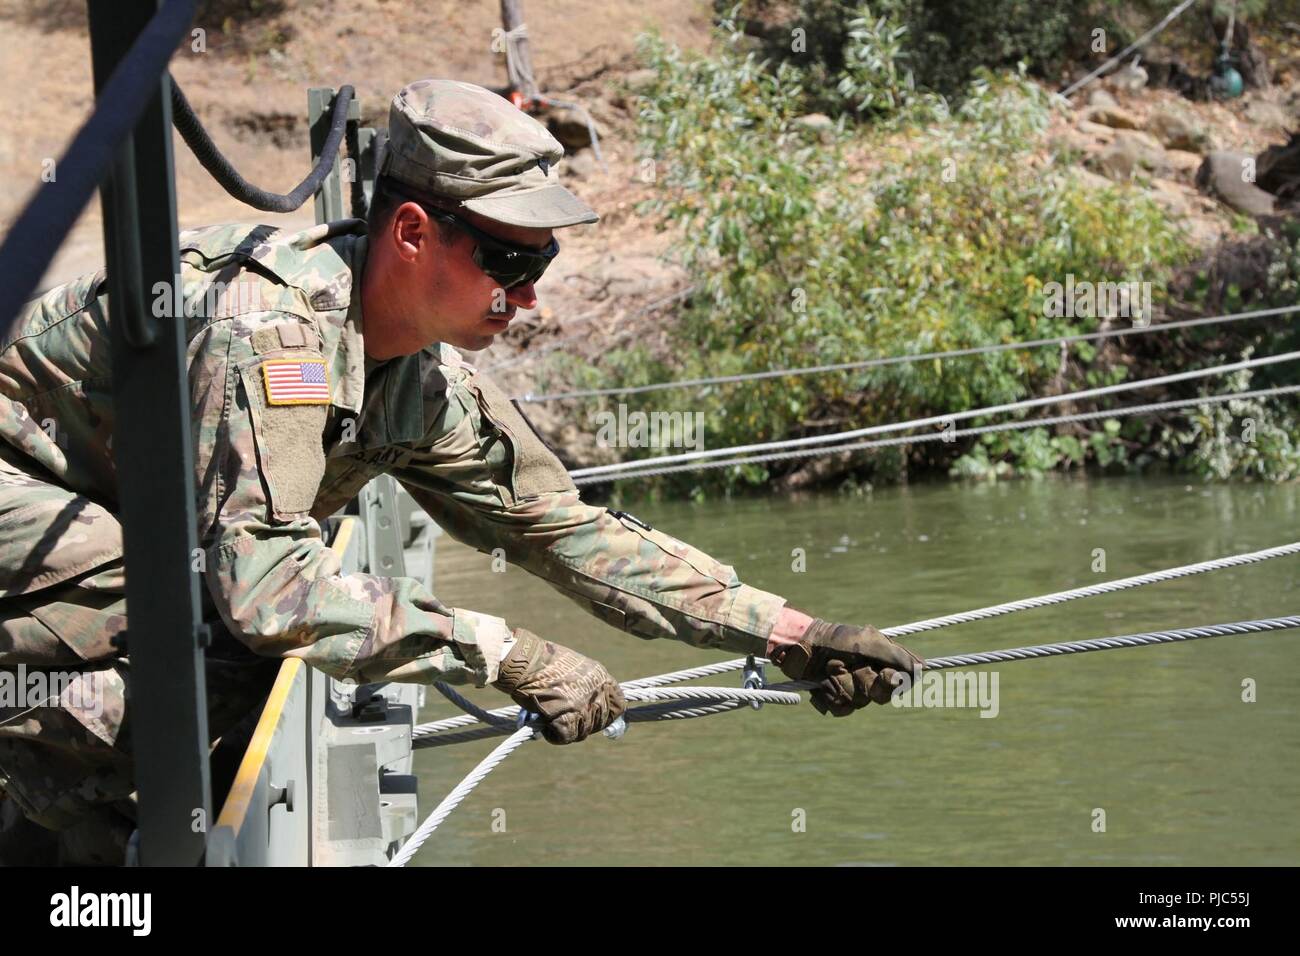 U.S. Army Spc. Michael Fereira of the 132nd Multirole Bridge Company, 579th Engineer Battalion, 49th Military Police Brigade, California Army National Guard, checks the tension of a wire cable July 13 at Cache Creek Regional Park, California, where the 132nd constructed a temporary floating bridge to support the California Department of Forestry and Fire Protection (CAL FIRE) efforts to battle Northern California wildfires. This is the second time the CalGuard unit was summoned for a state mission to support CAL FIRE. Stock Photo